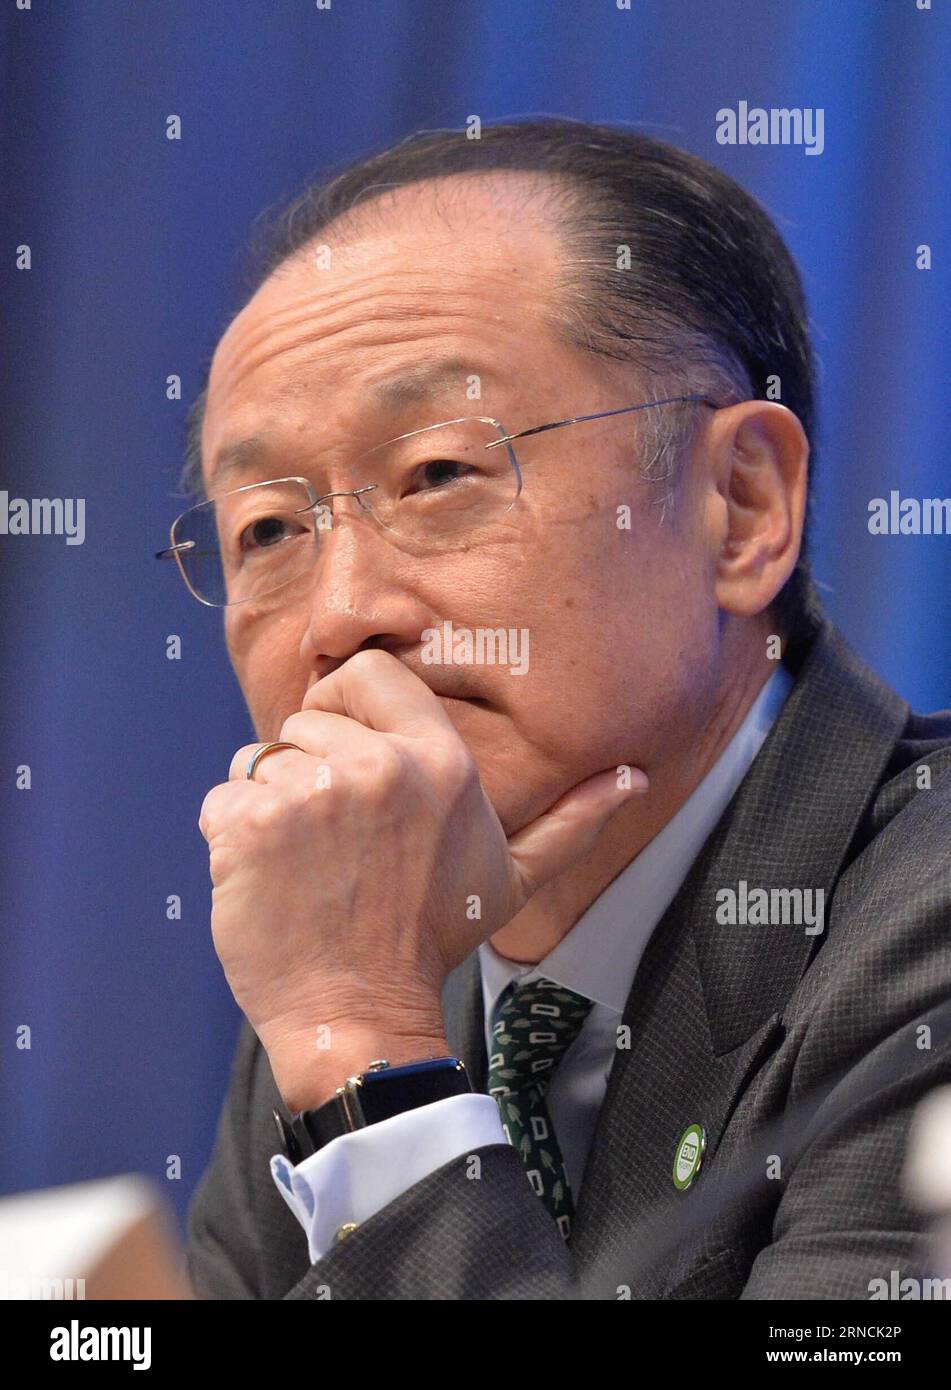 (160415) -- WASHINGTON D.C., April 15, 2016 -- World Bank President Jim Yong Kim attends a press conference during the IMF-World Bank 2016 Spring Meetings in Washington D.C., capital of the United States, April 14, 2016. ) (djj) U.S.-WASHINGTON D.C.-WORLD BANK-PRESS CONFERENCE BaoxDandan PUBLICATIONxNOTxINxCHN   160415 Washington D C April 15 2016 World Bank President Jim Yong Kim Attends a Press Conference during The IMF World Bank 2016 Spring Meetings in Washington D C Capital of The United States April 14 2016 djj U S Washington D C World Bank Press Conference baoxdandan PUBLICATIONxNOTxINx Stock Photo